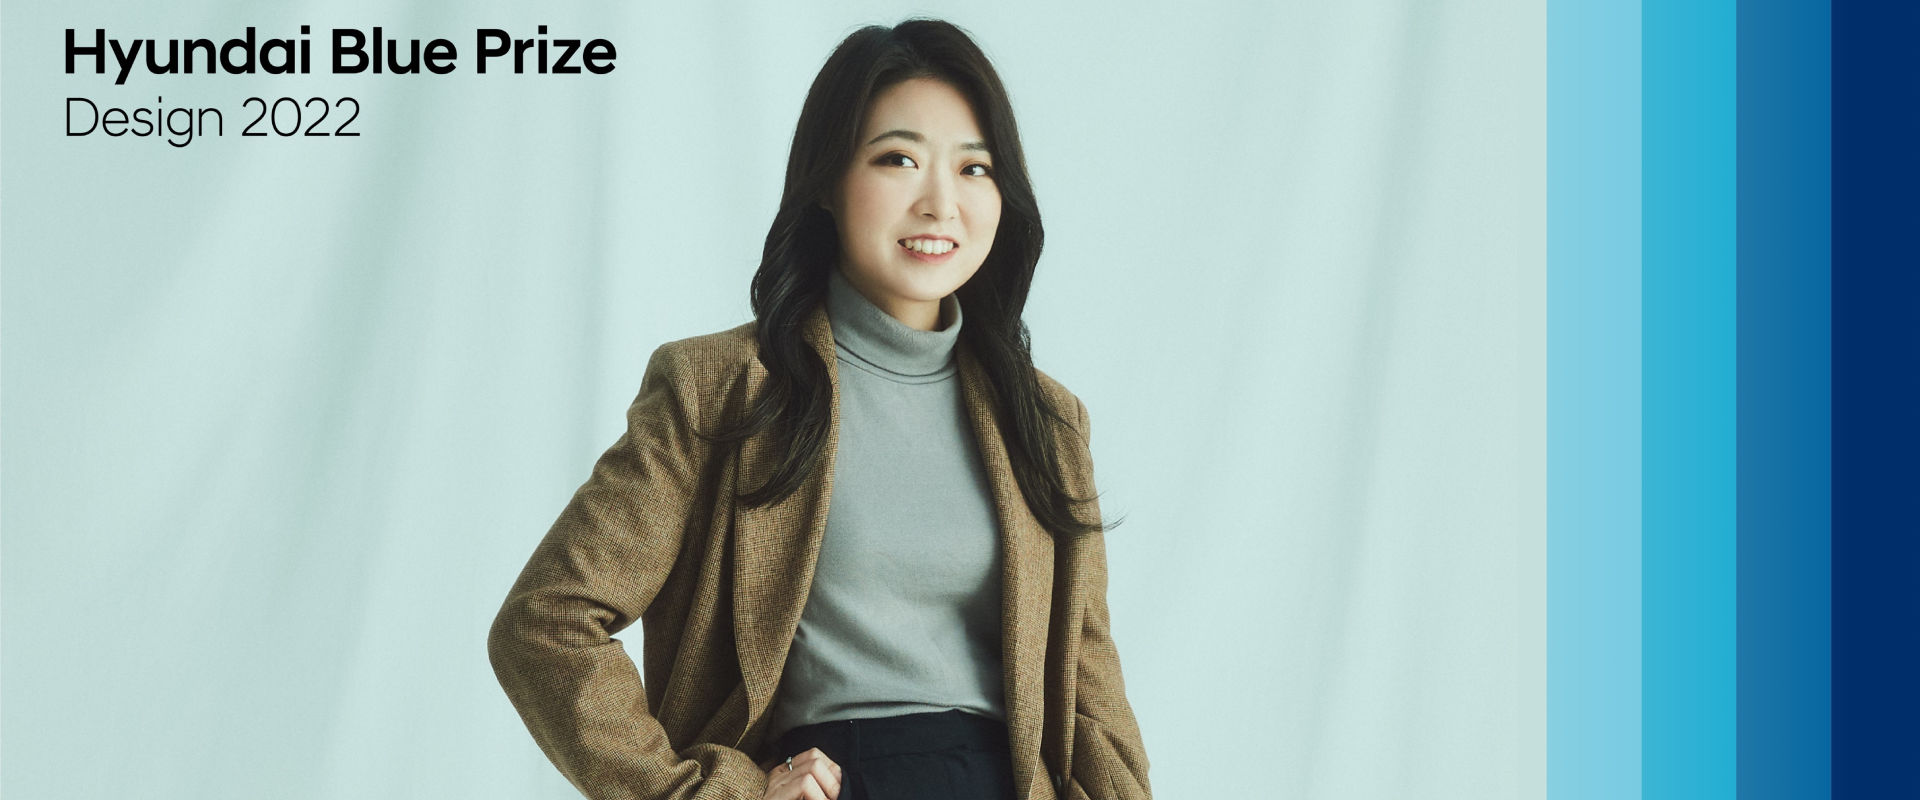 Photo of Jimin Park, a graduate student majoring in industrial design at SNU and the grand winner of Hyundai Blue Prize Design 2022